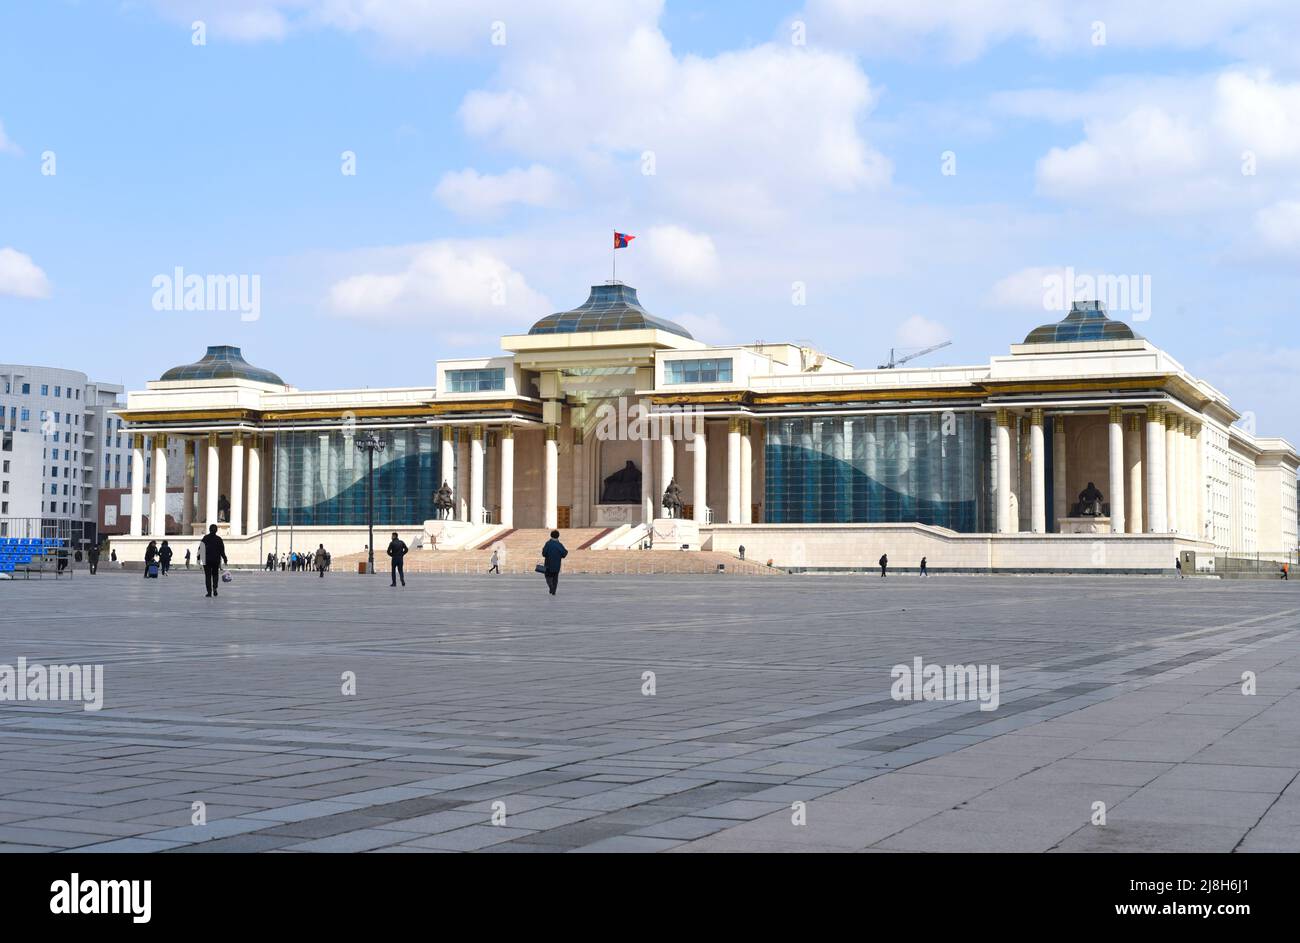 Ulaanbaator, Mongolia - 11 May, 2022: The Government Palace of Chinggis Square or Sukhbaatar Square in Ulaanbaatar, the capital city of Mongolia Stock Photo